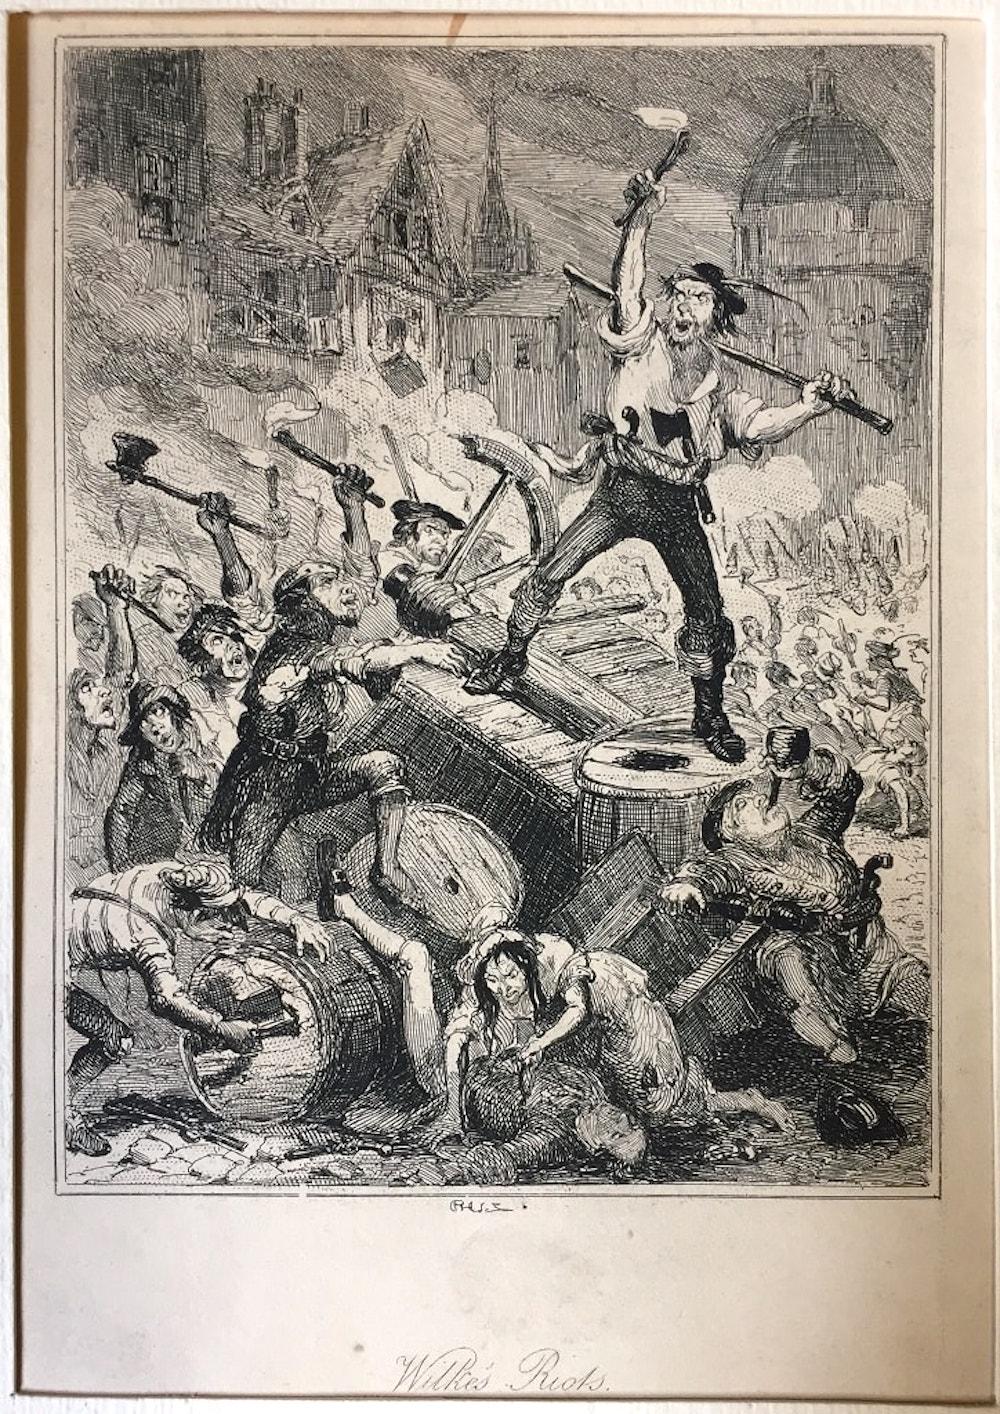 Browne Hablot Knight  Figurative Print - Wilkes Riots- Original Etching by PHIZ - Mid 19th Century 